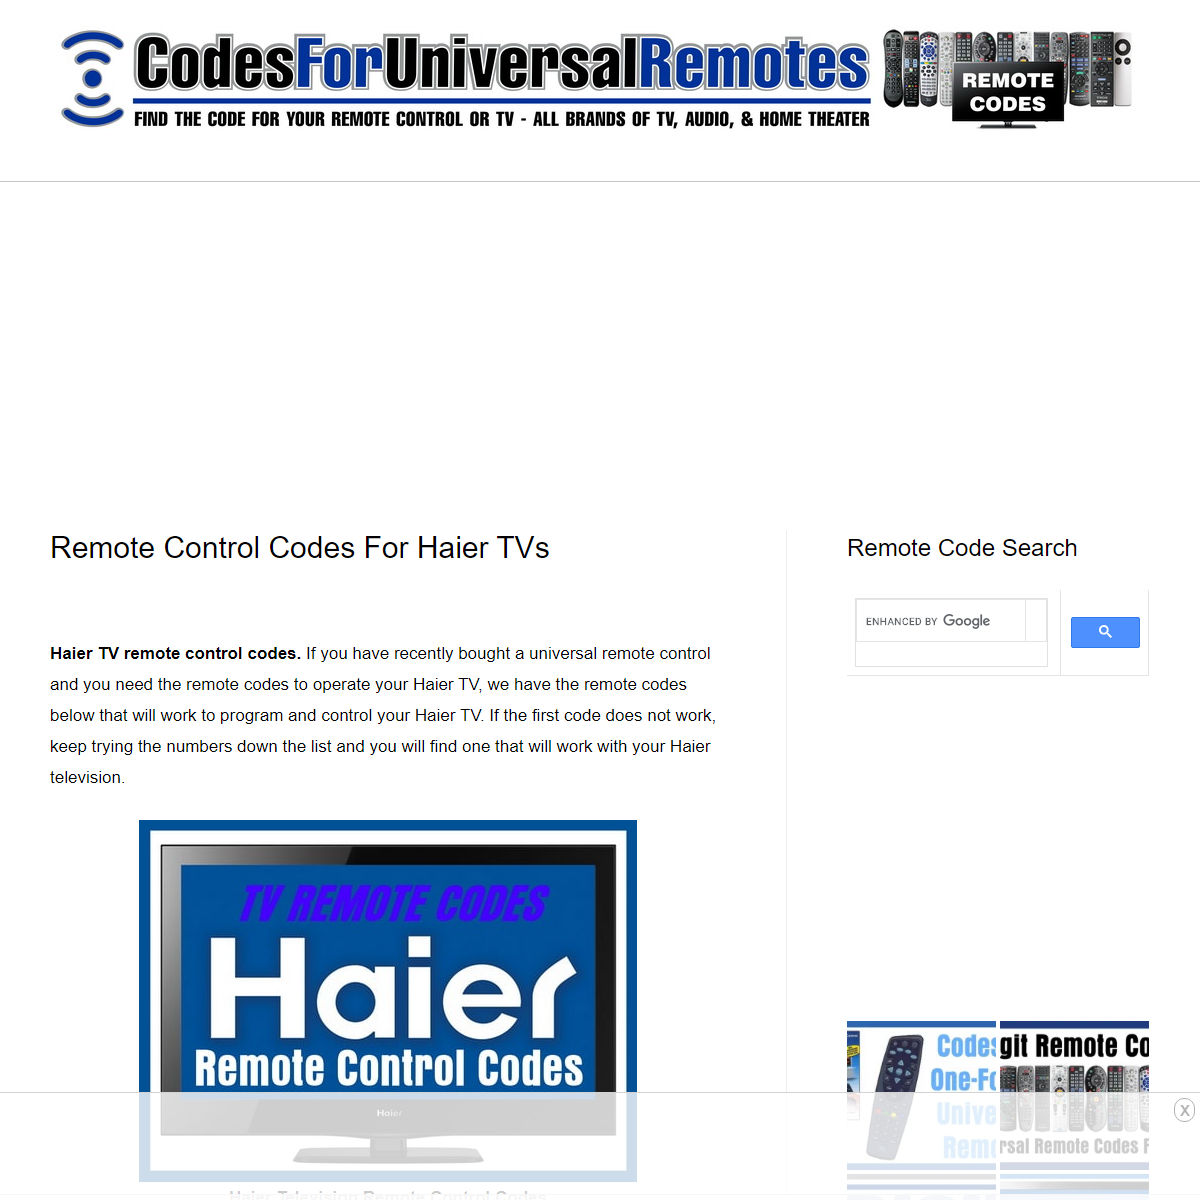 Remote Control Codes For Haier TVs - Codes For Universal Remotes